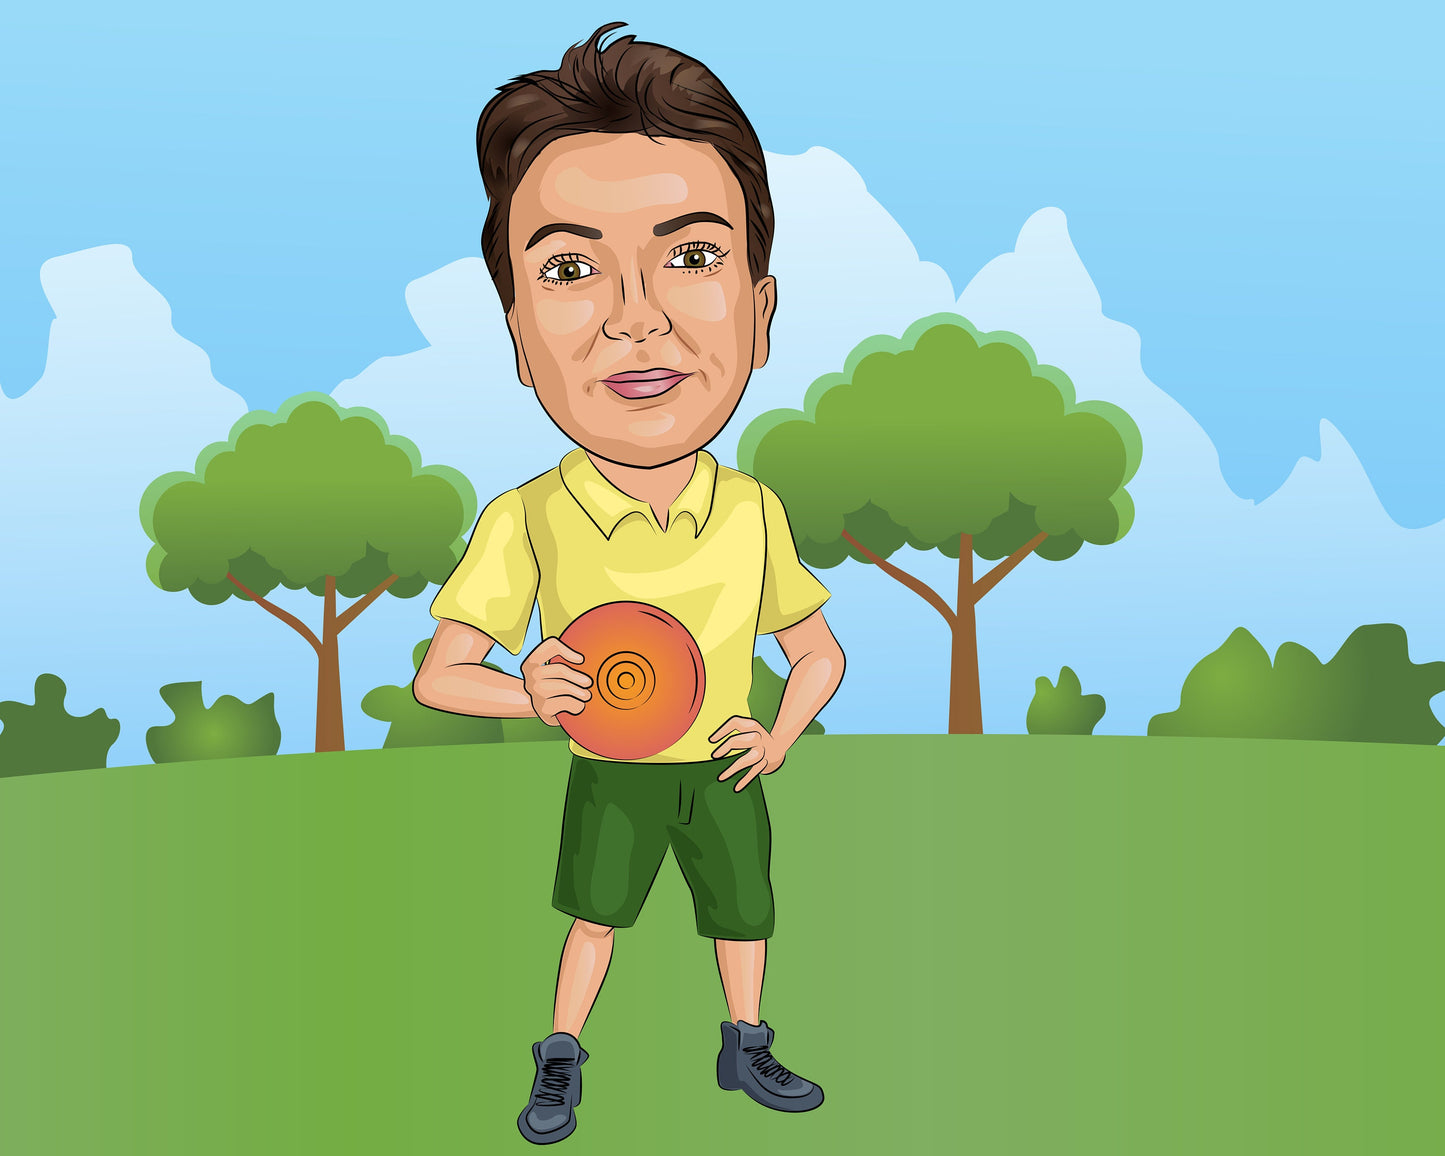 Frisbee Player Gift - Custom Caricature Portrait From Your Photo/ultimate frisbee gift